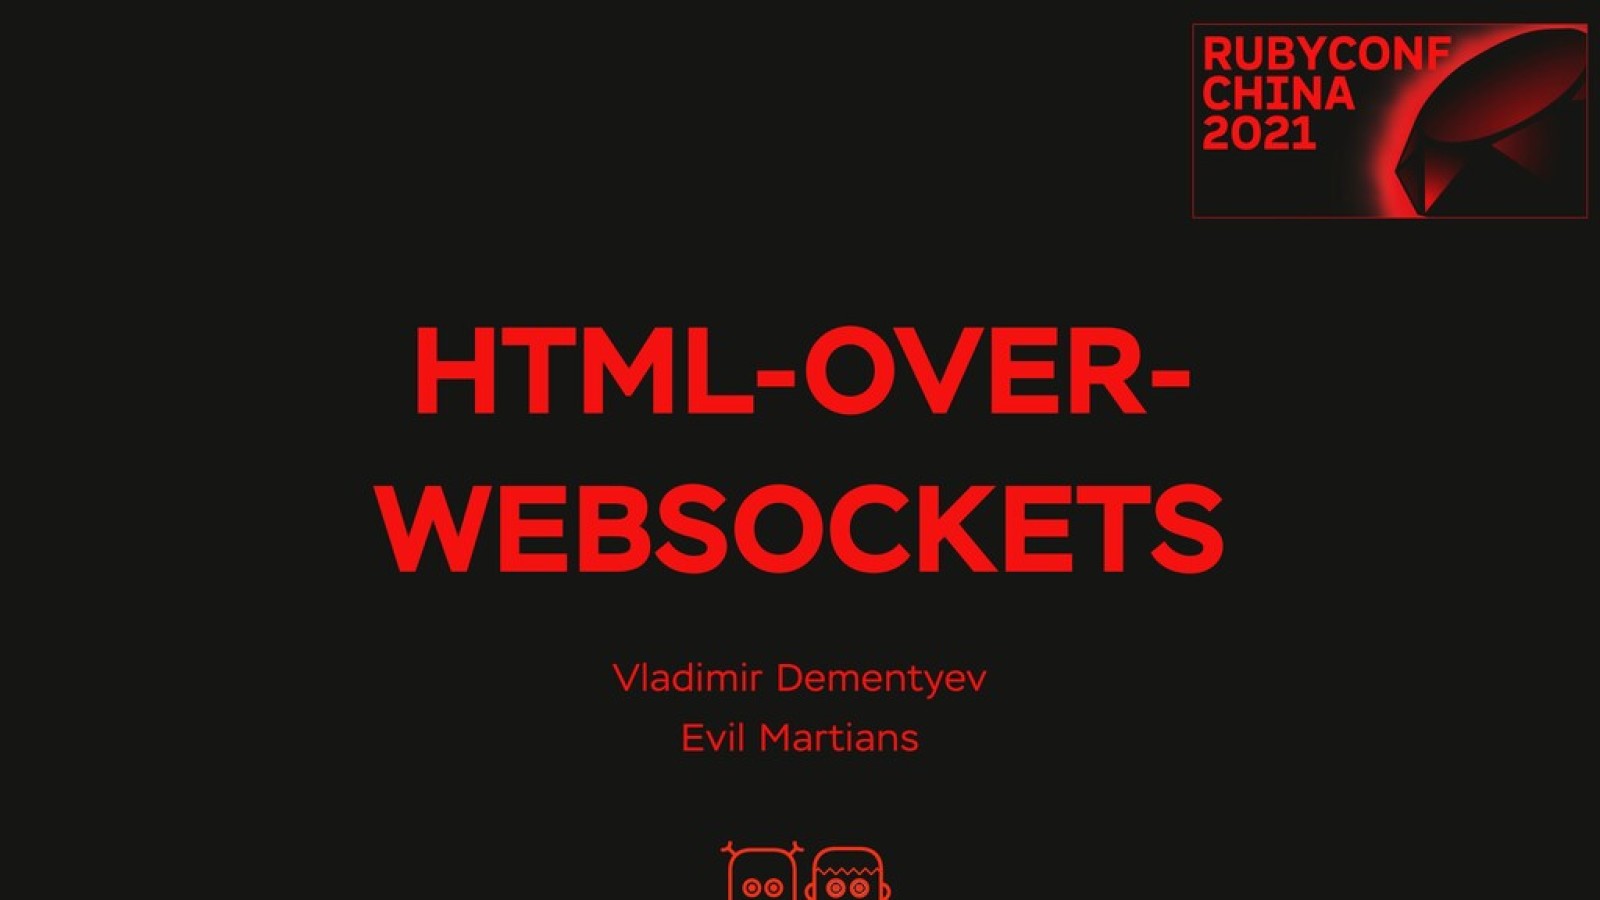 HTML-over-WebSockets: From LiveView to Hotwire